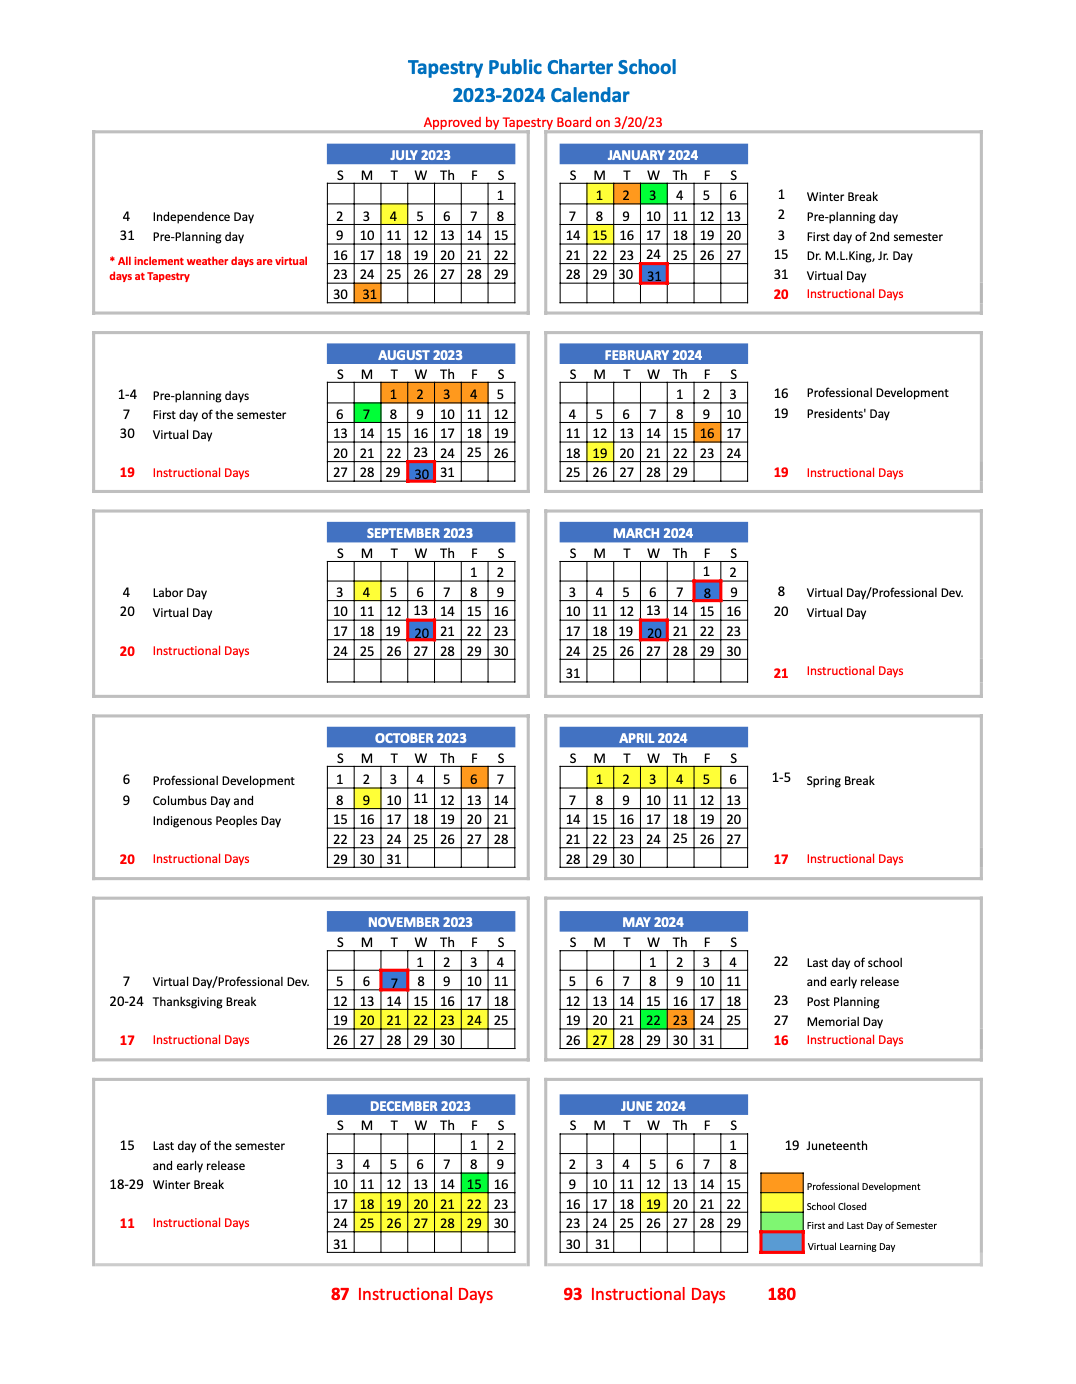 The 2023-2024 Calendar is Out – Tapestry Public Charter School